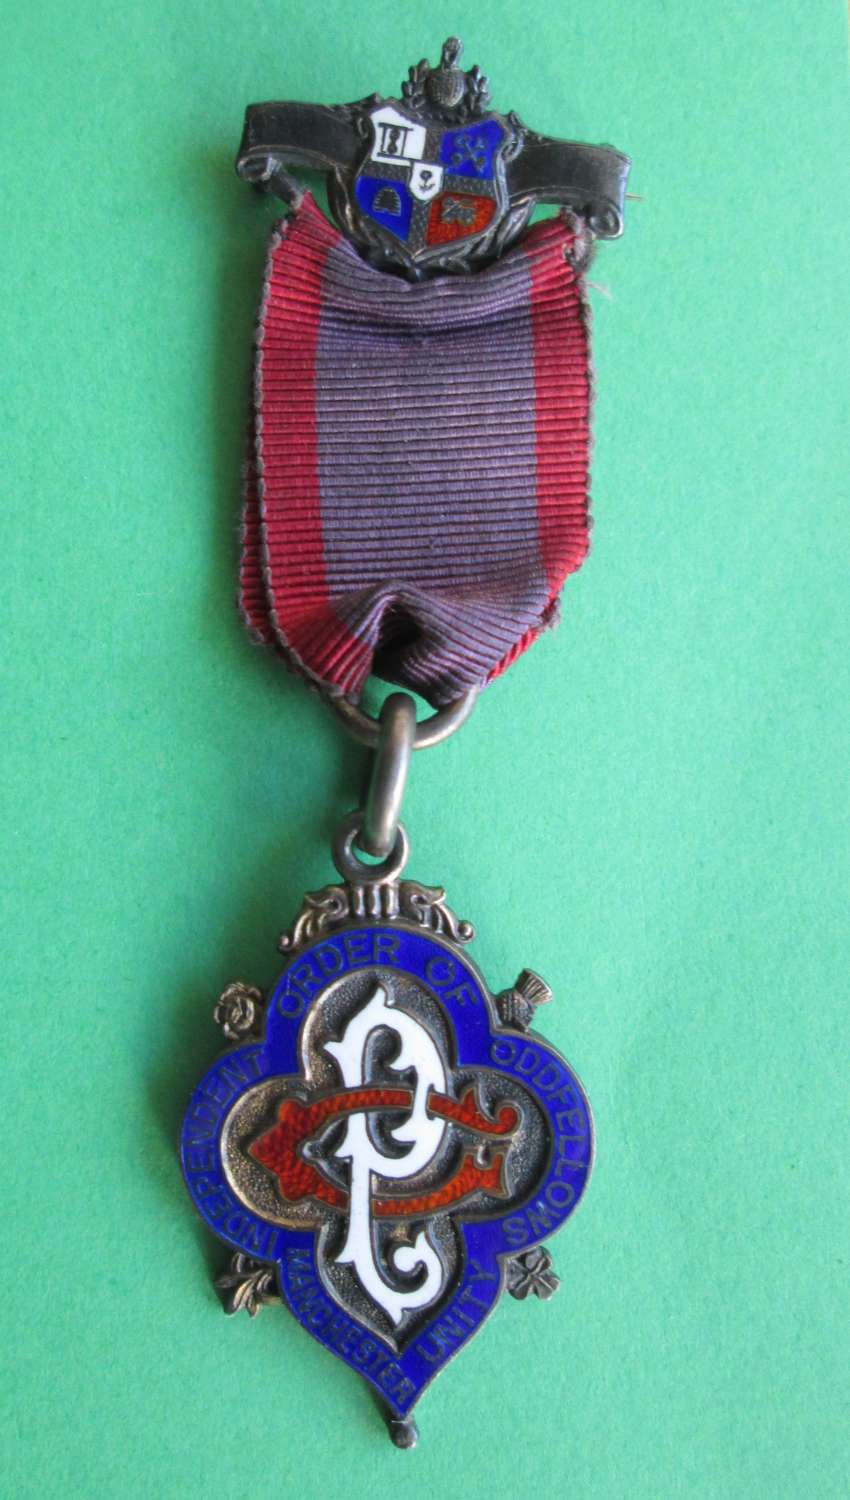 A SILVER MANCHESTER UNITY INDEPENDENT ORDER OF ODDFELLOWS MEDAL